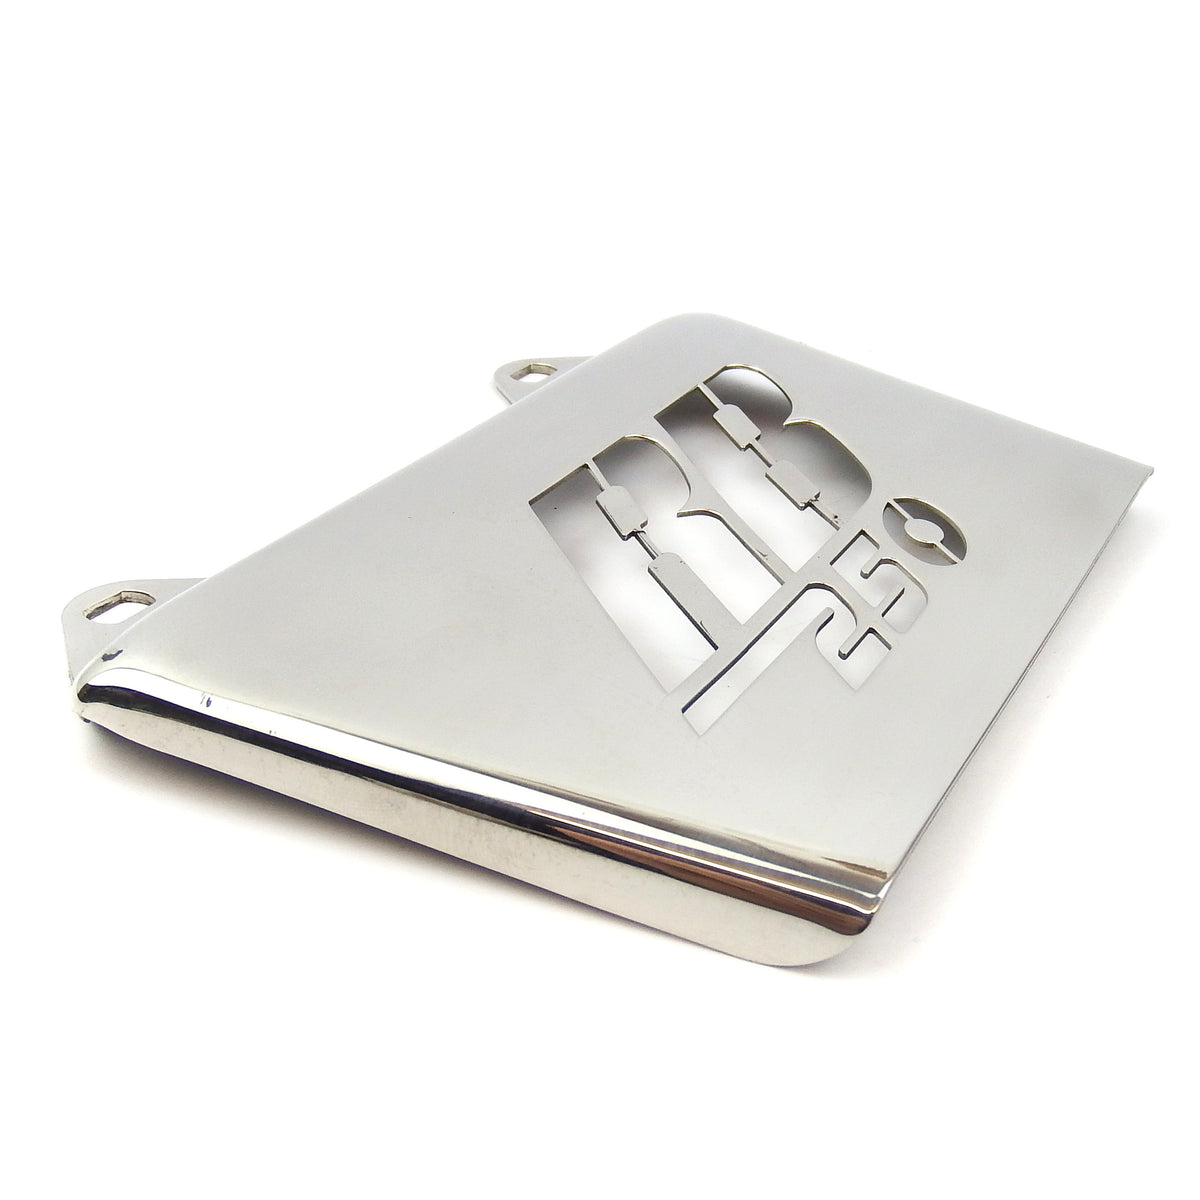 Lambretta RB250 Laser Cut Rear Mudflap - Polished Stainless Steel